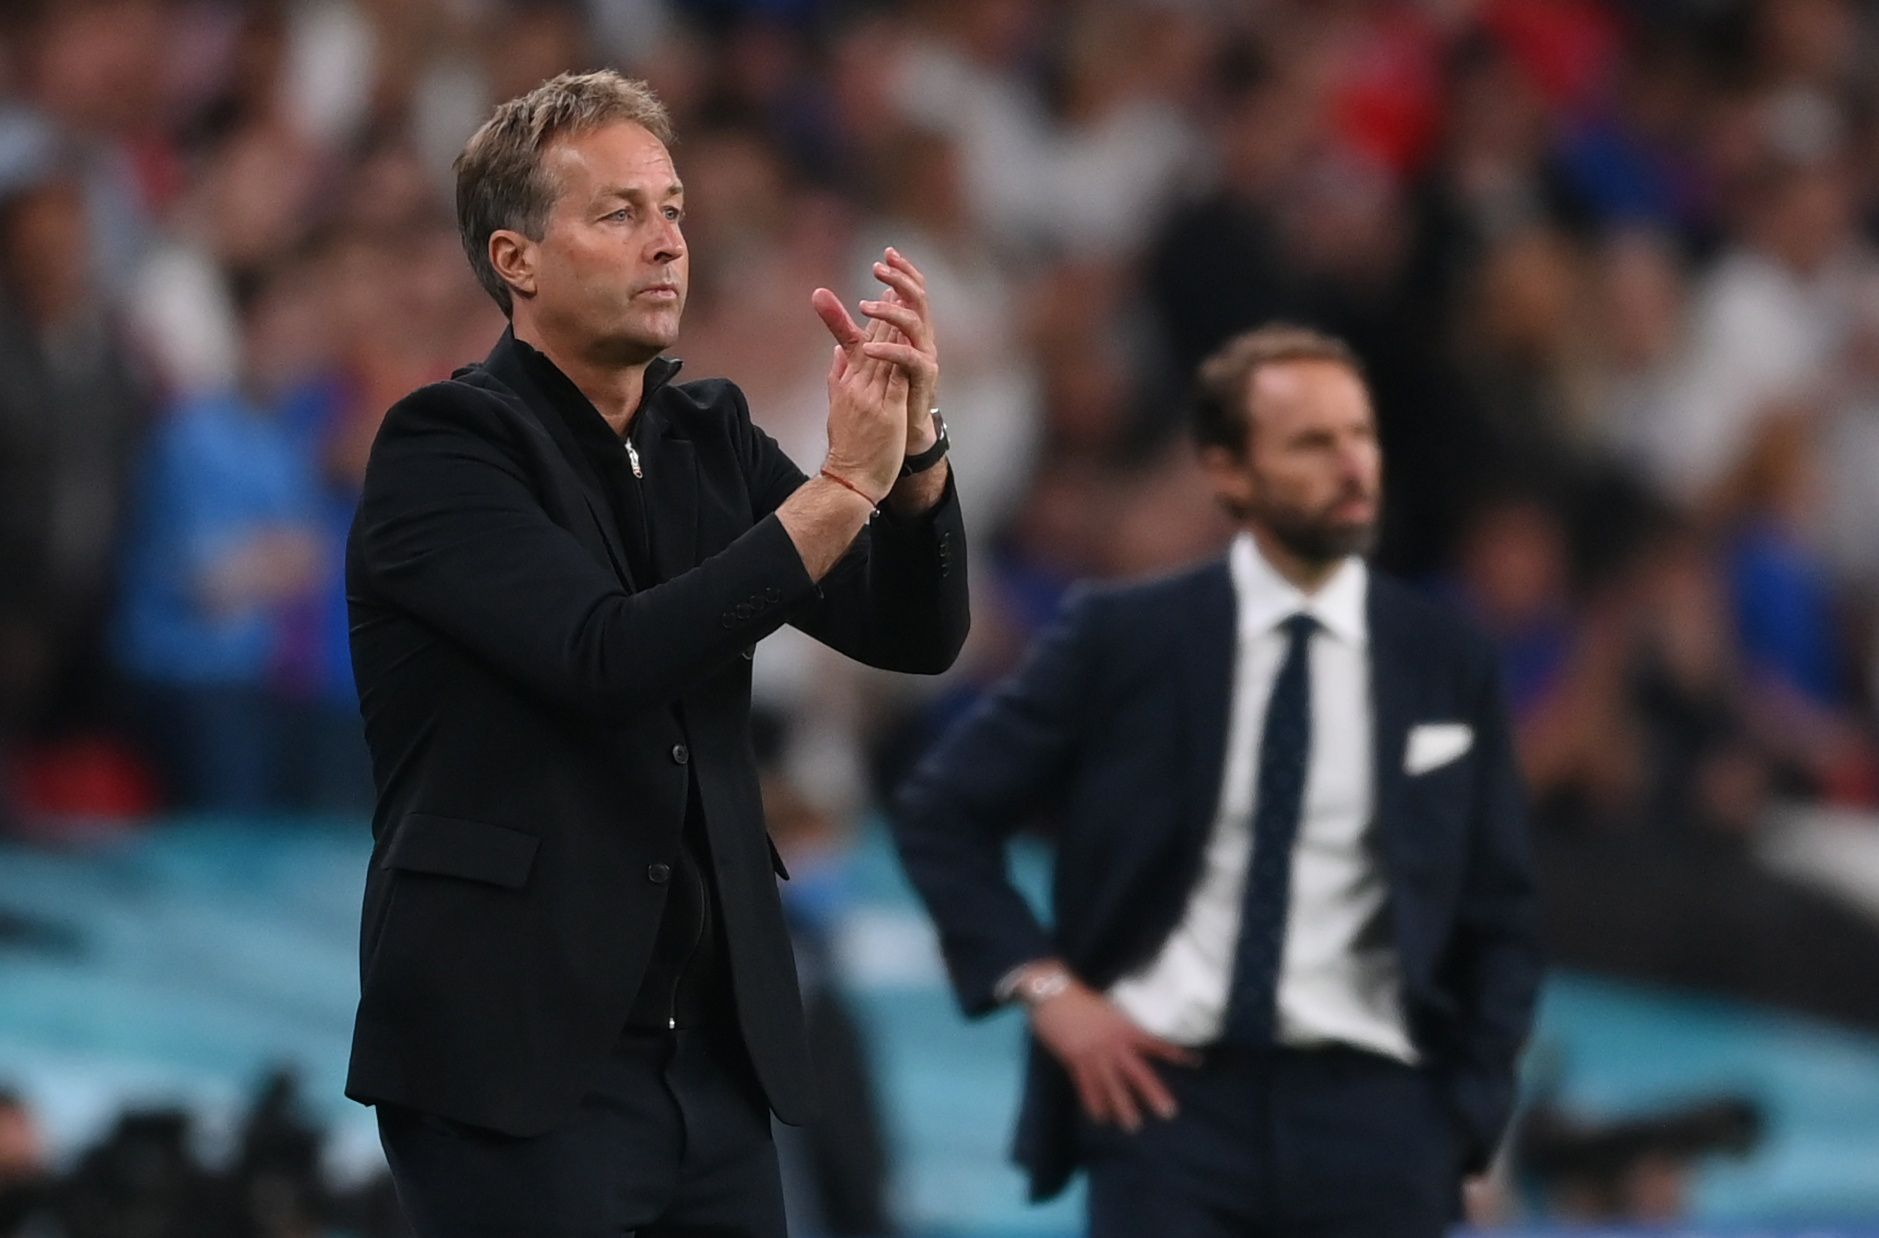 Denmark manager Kasper Hjulmand taking charge of a Euro 2020 game